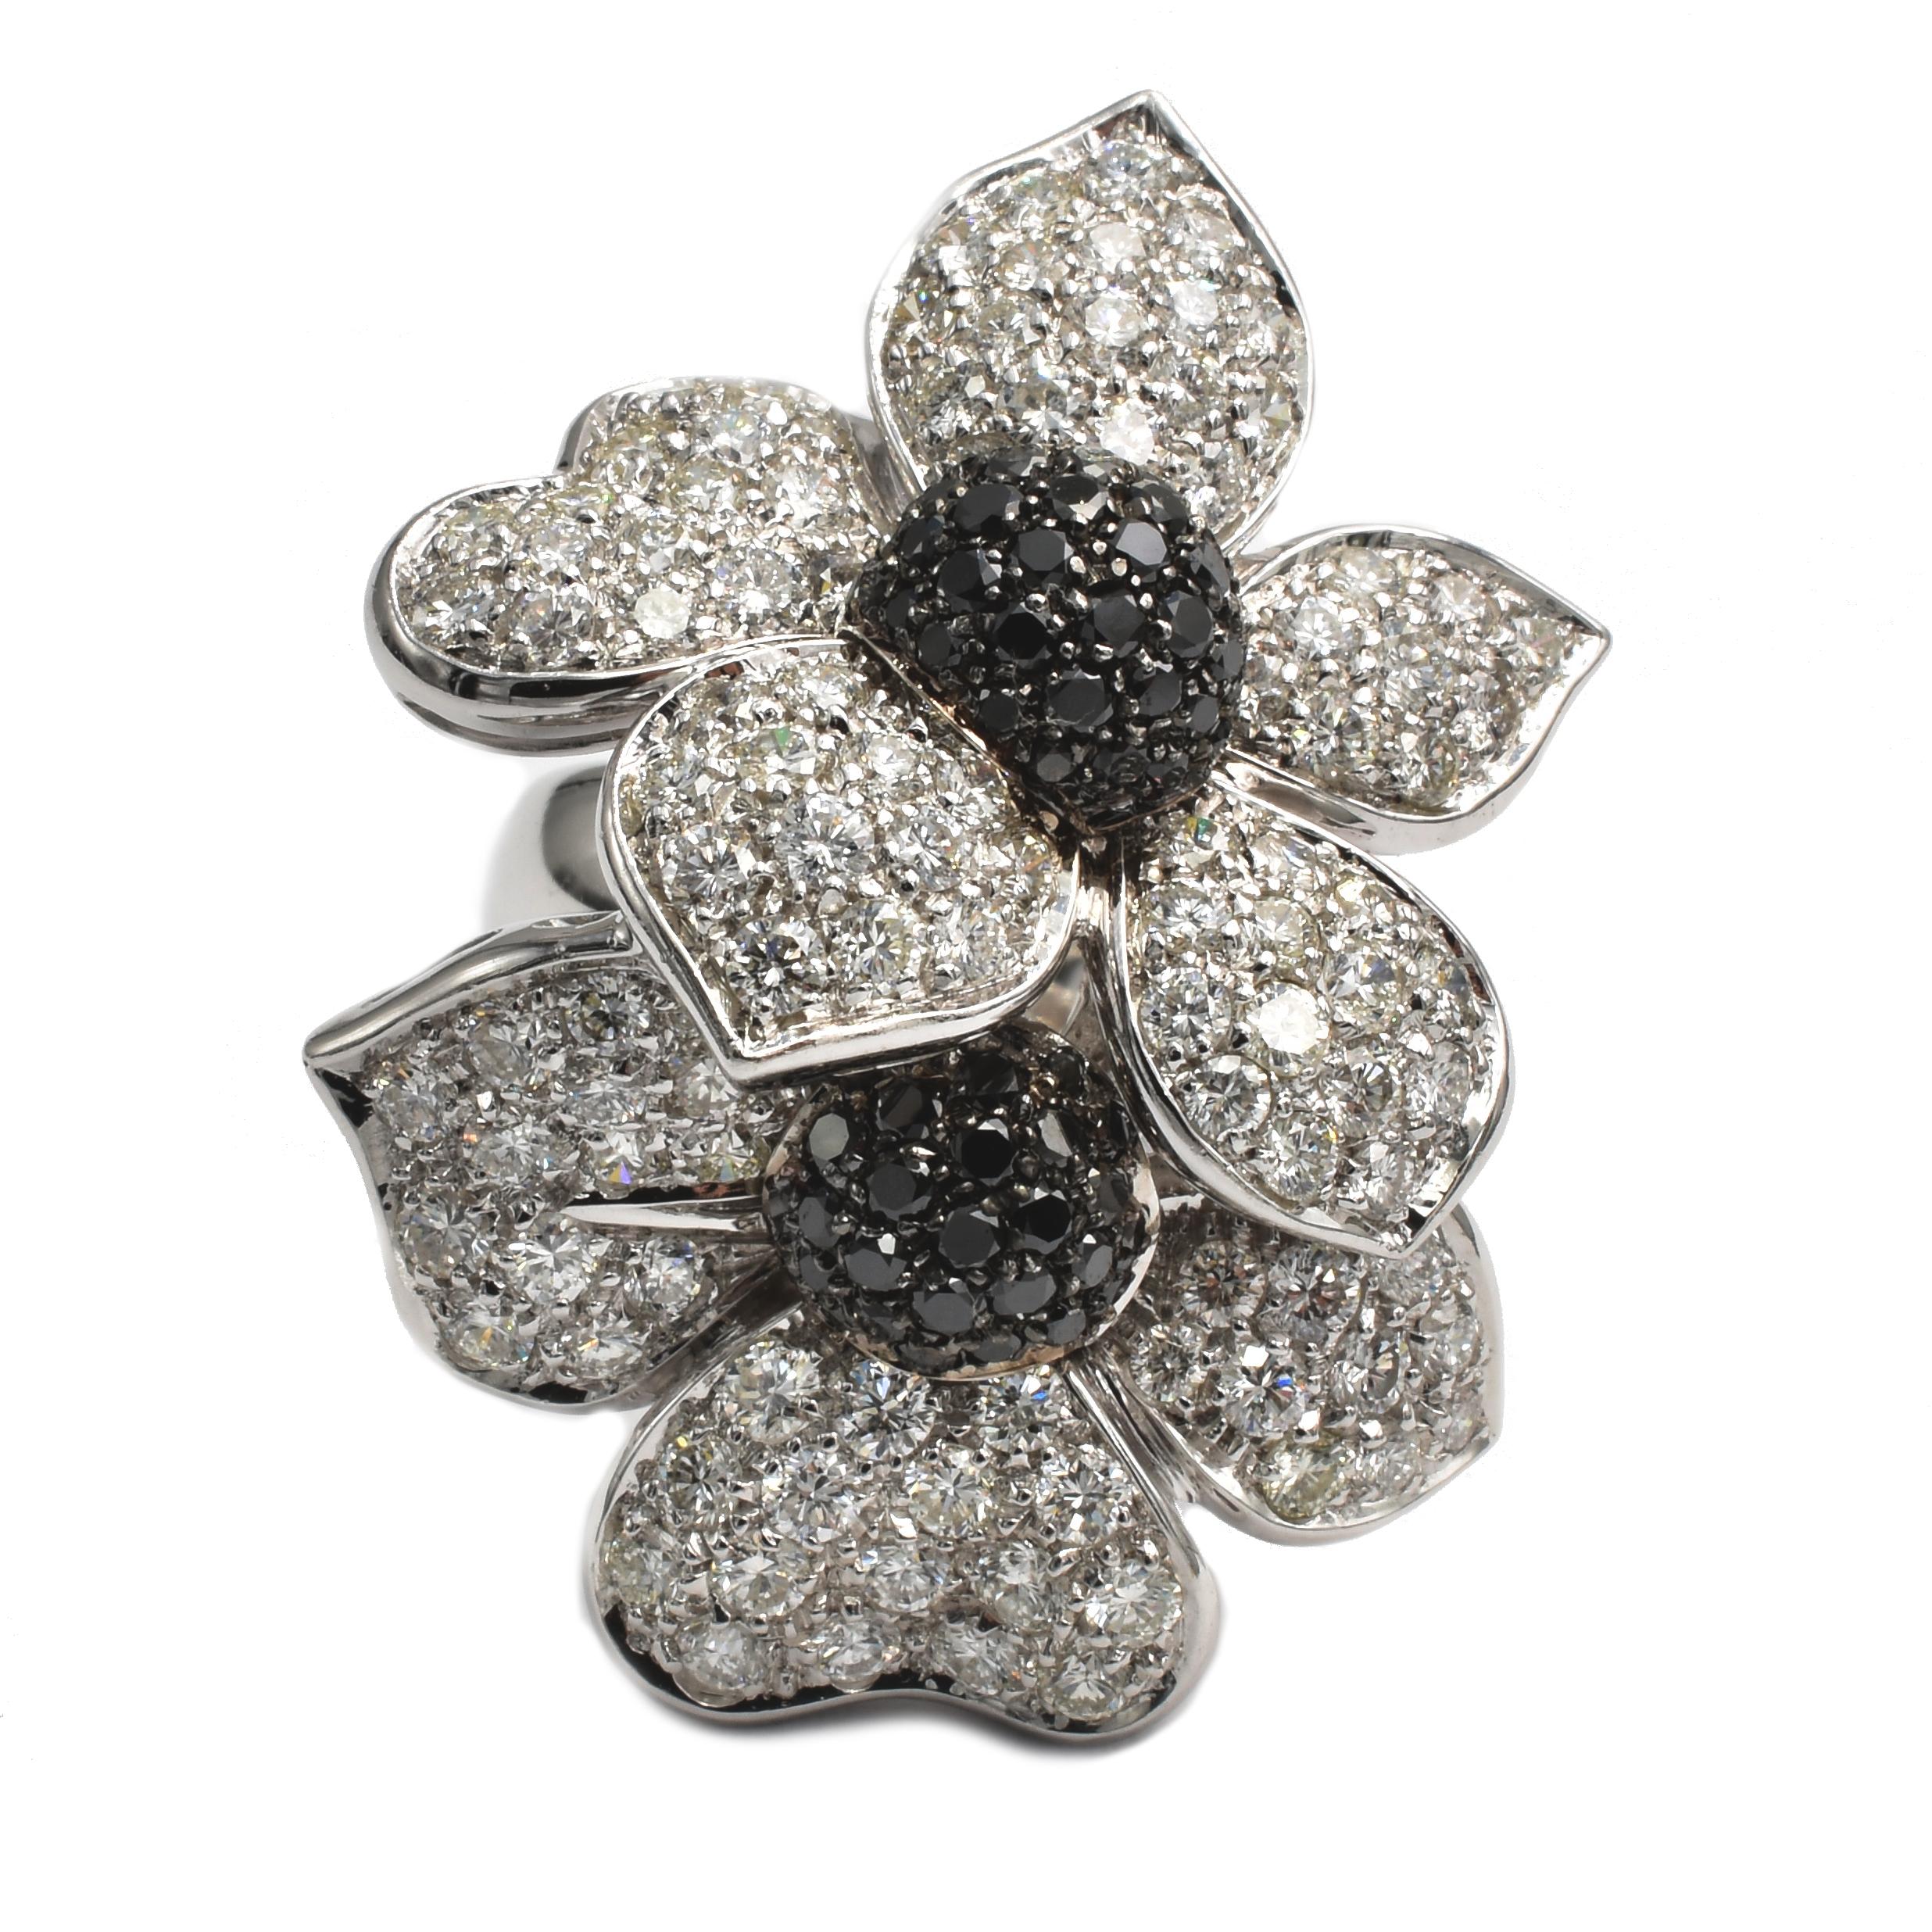 18Kt White Gold Double Flower Ring with White Diamonds on the Petals and Black Diamonds in the center.
Handmade in Italy in Our Atelier in Valenza (AL)
18 Kt Gold g 15.90
G Color Vs Clarity White Diamonds ct 2.80
Black Diamonds ct 0.69
This Ring is